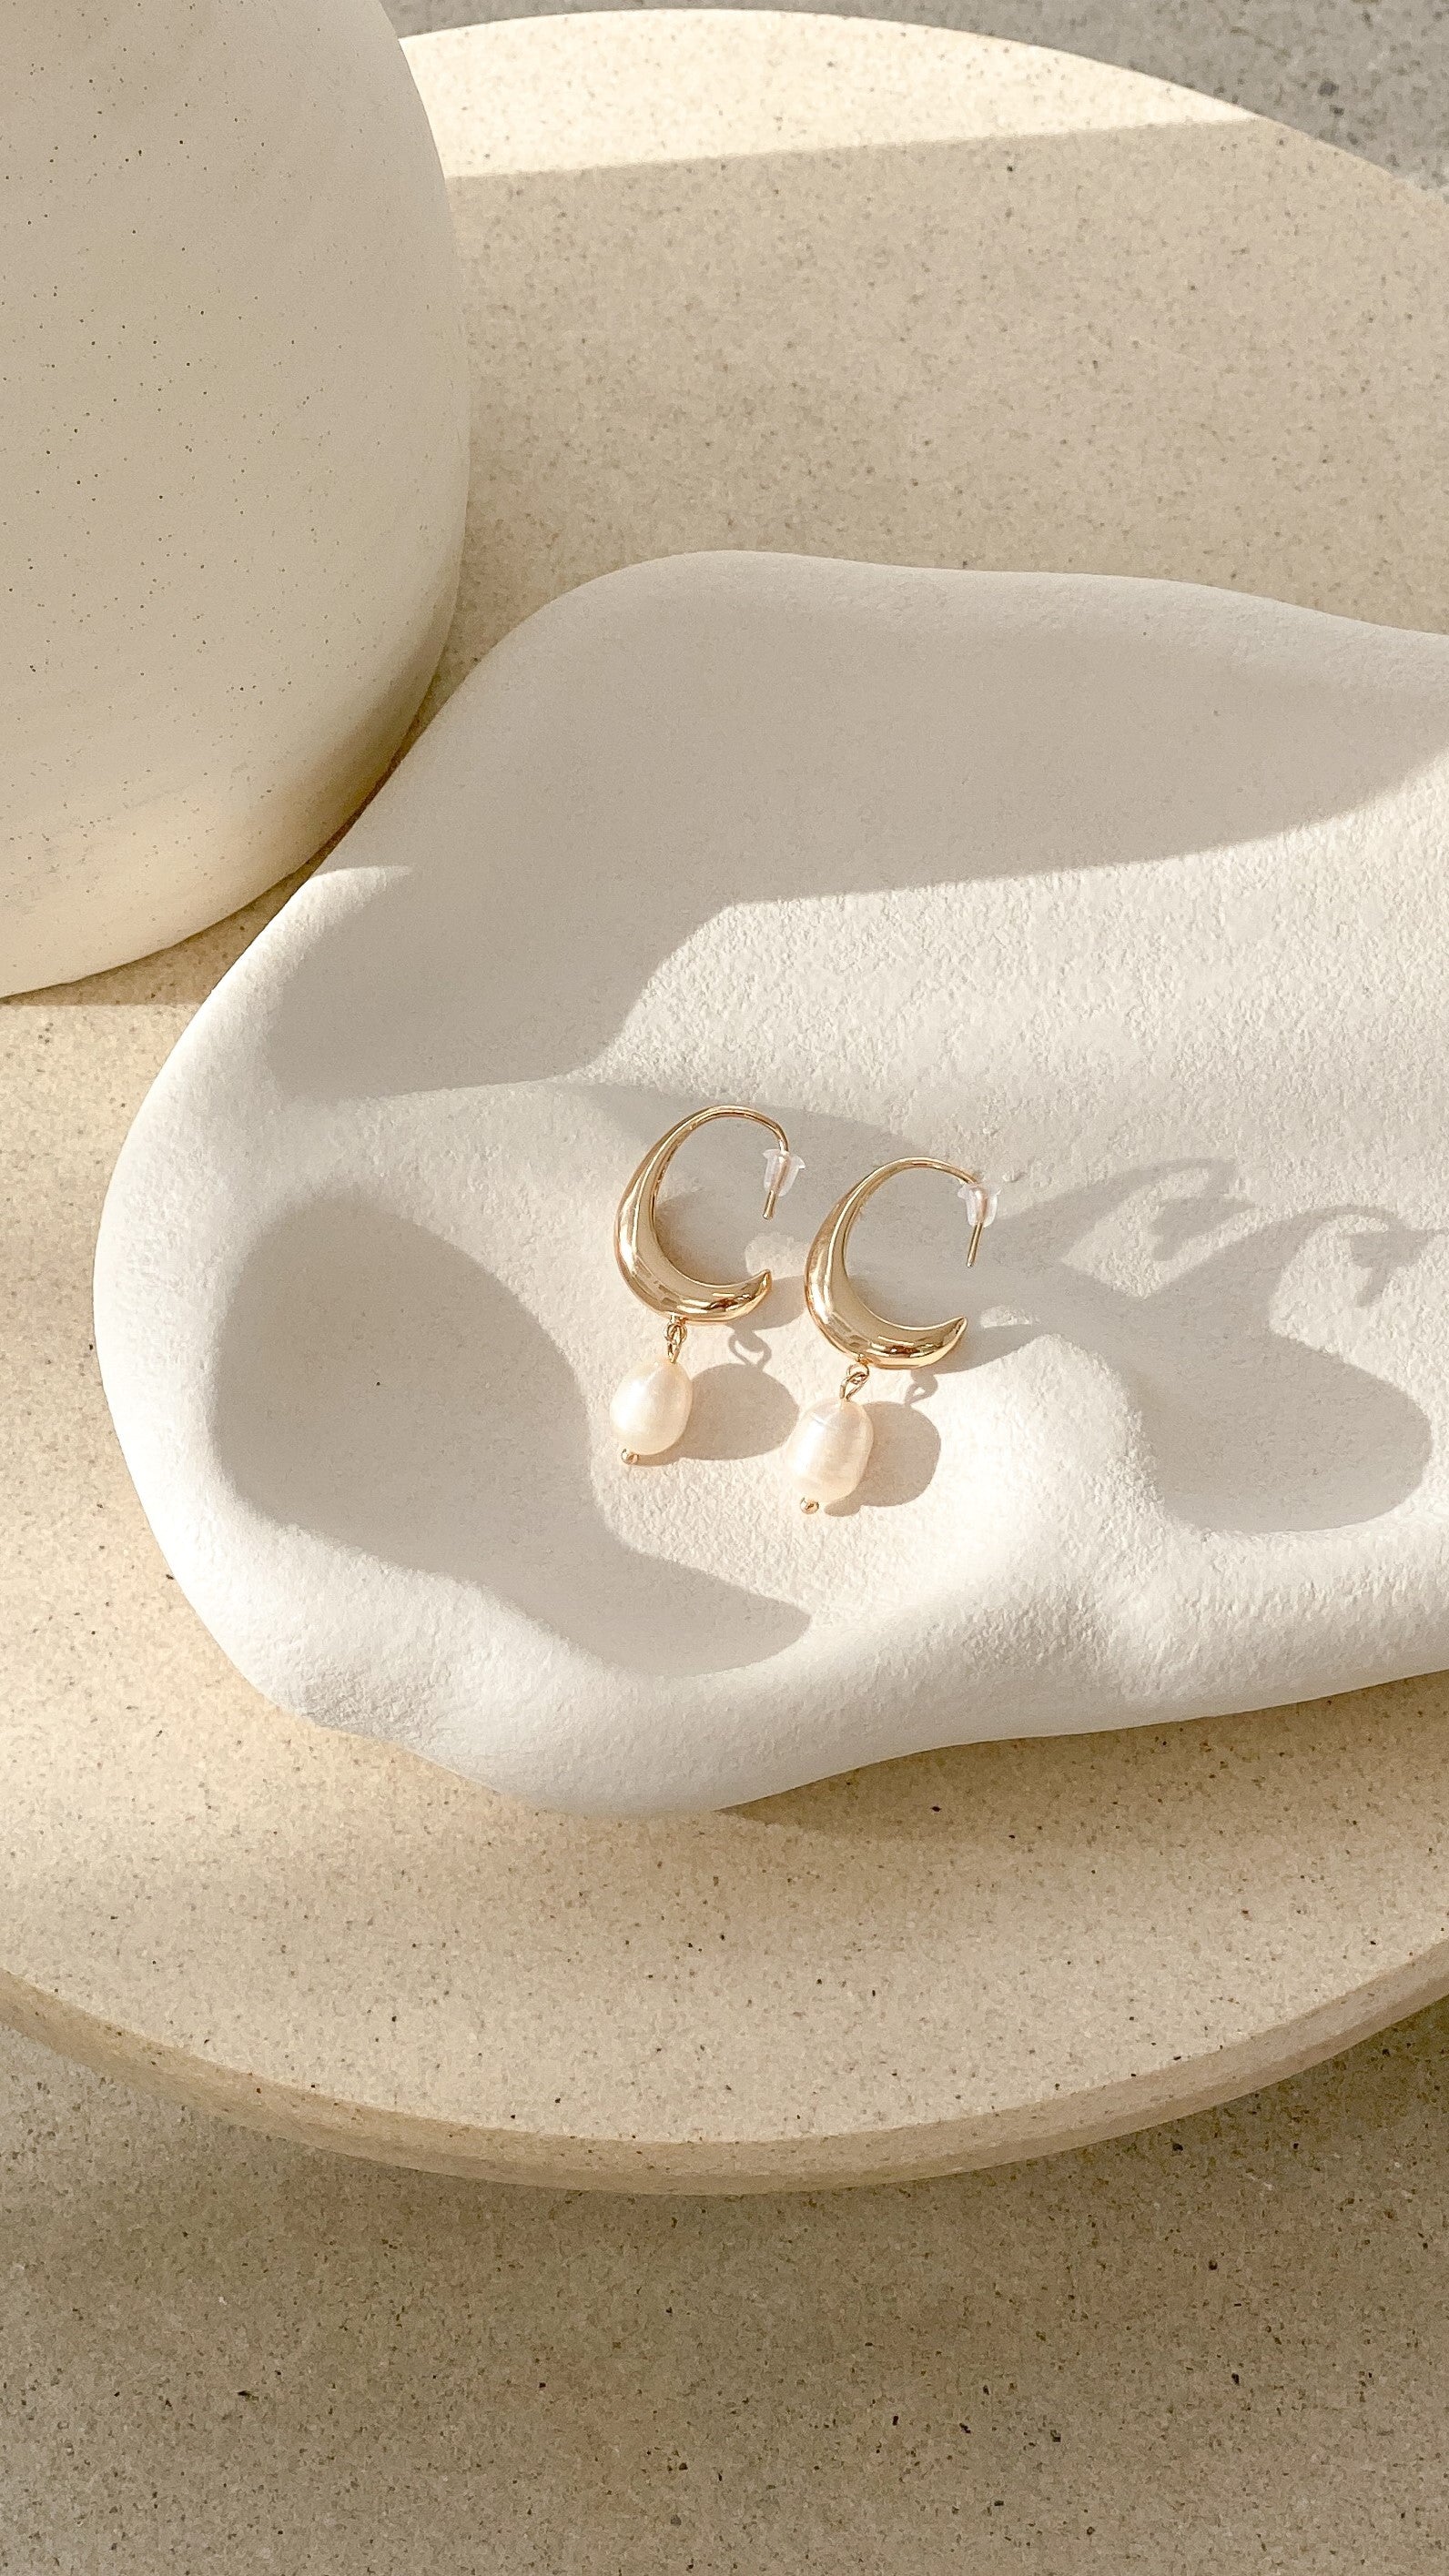 Pearl Drop Curved Hoops - Gold